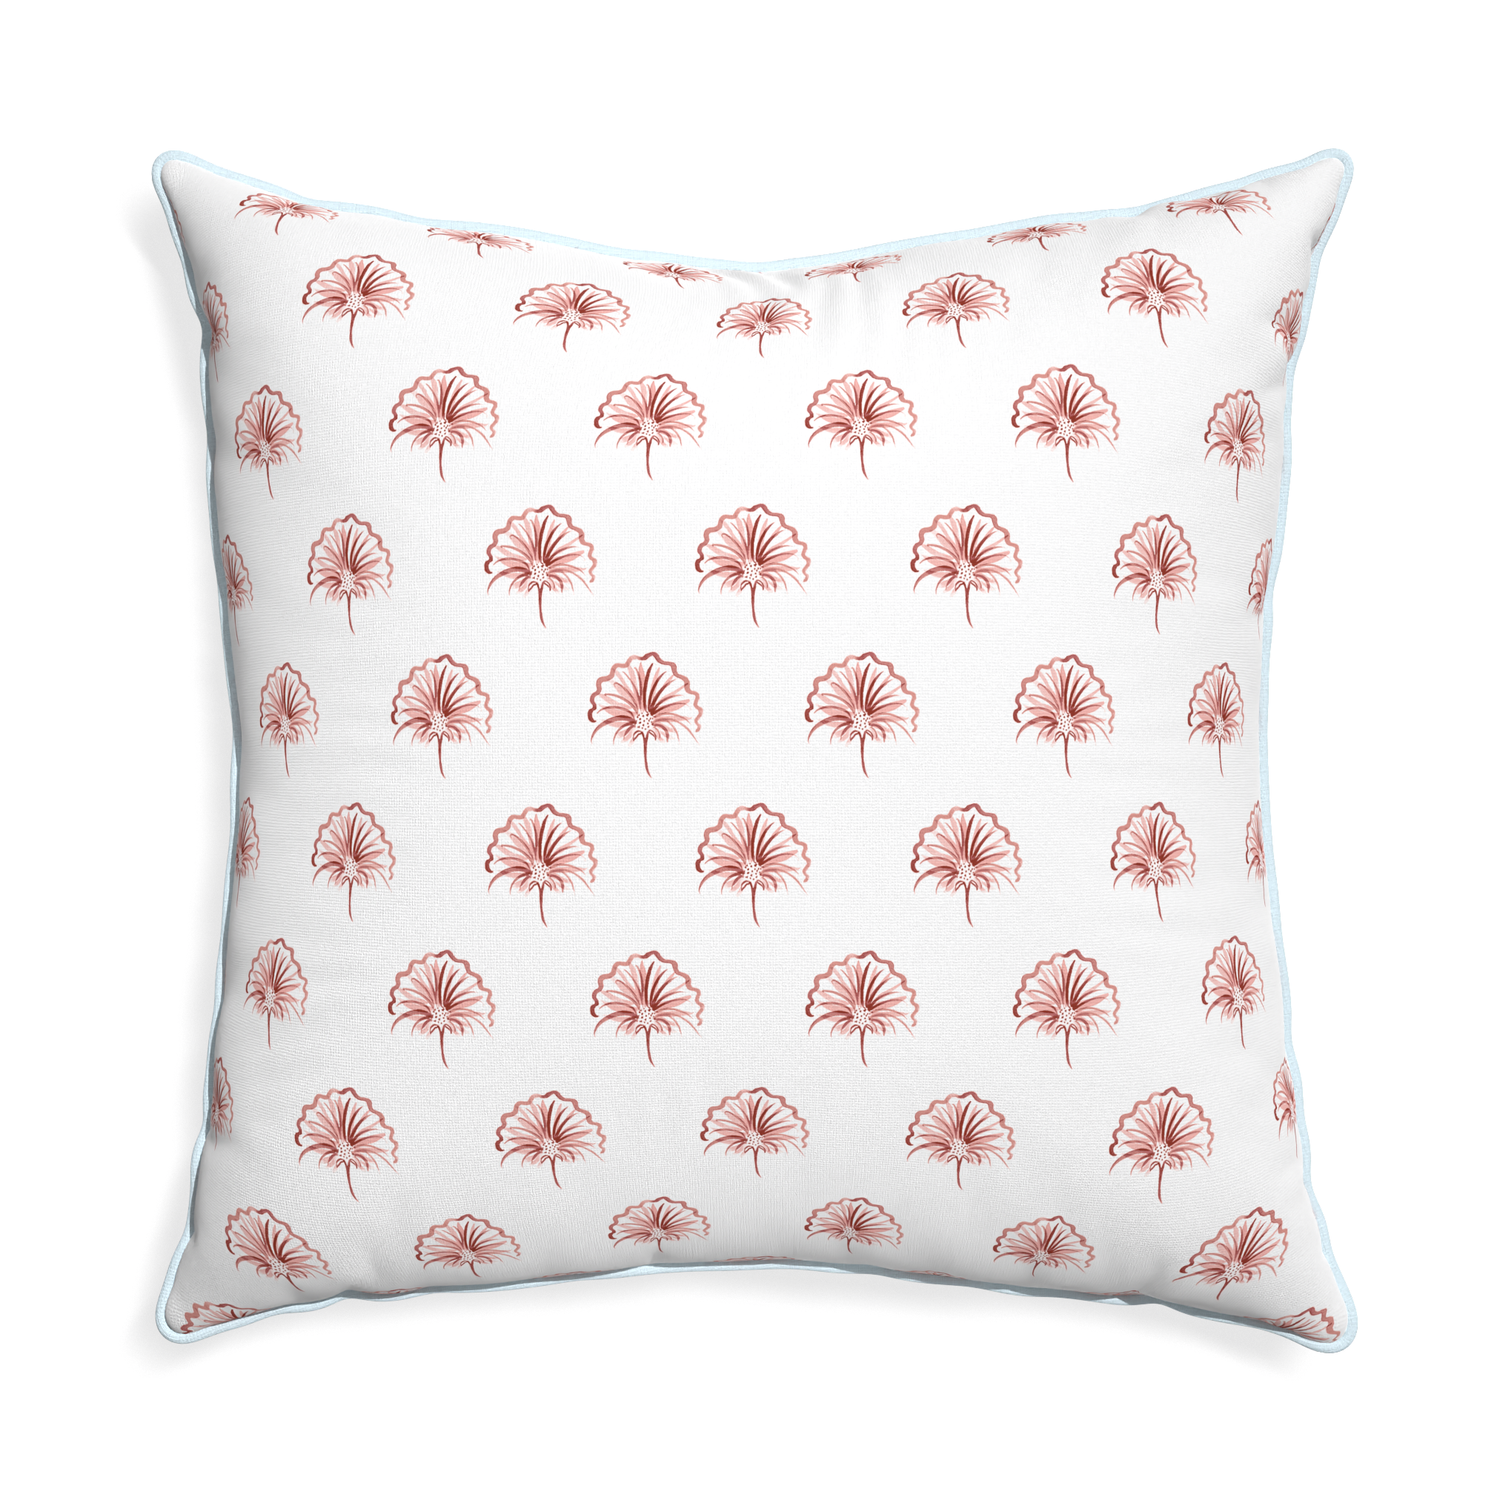 Euro-sham penelope rose custom floral pinkpillow with powder piping on white background